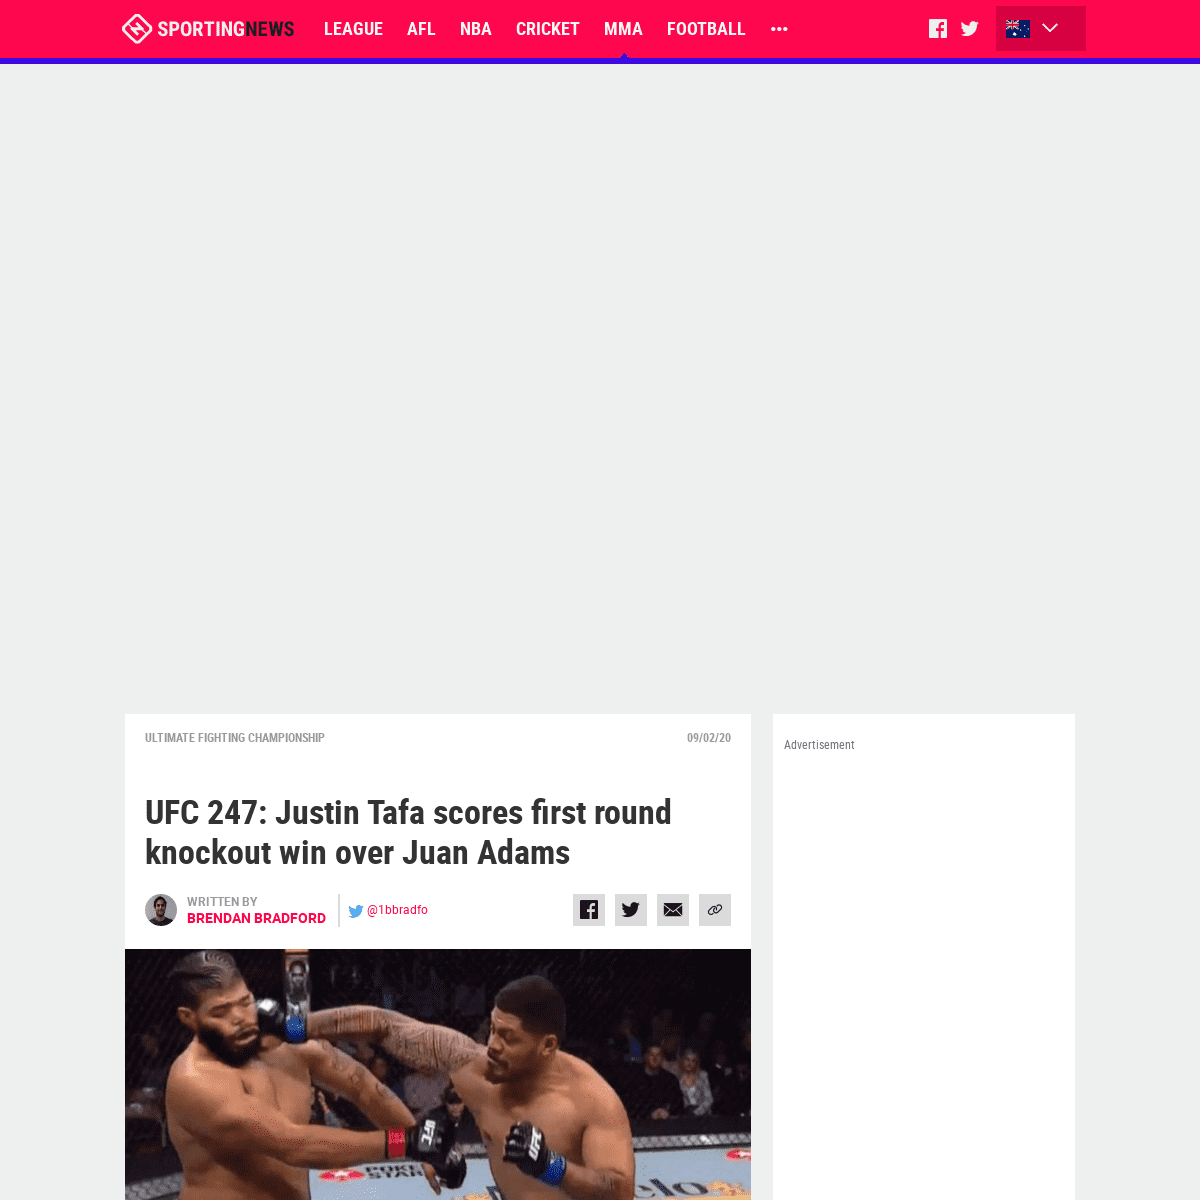 A complete backup of www.sportingnews.com/au/mma/news/ufc-247-justin-tafa-scores-first-round-knockout-win-over-juan-adams/1c73we